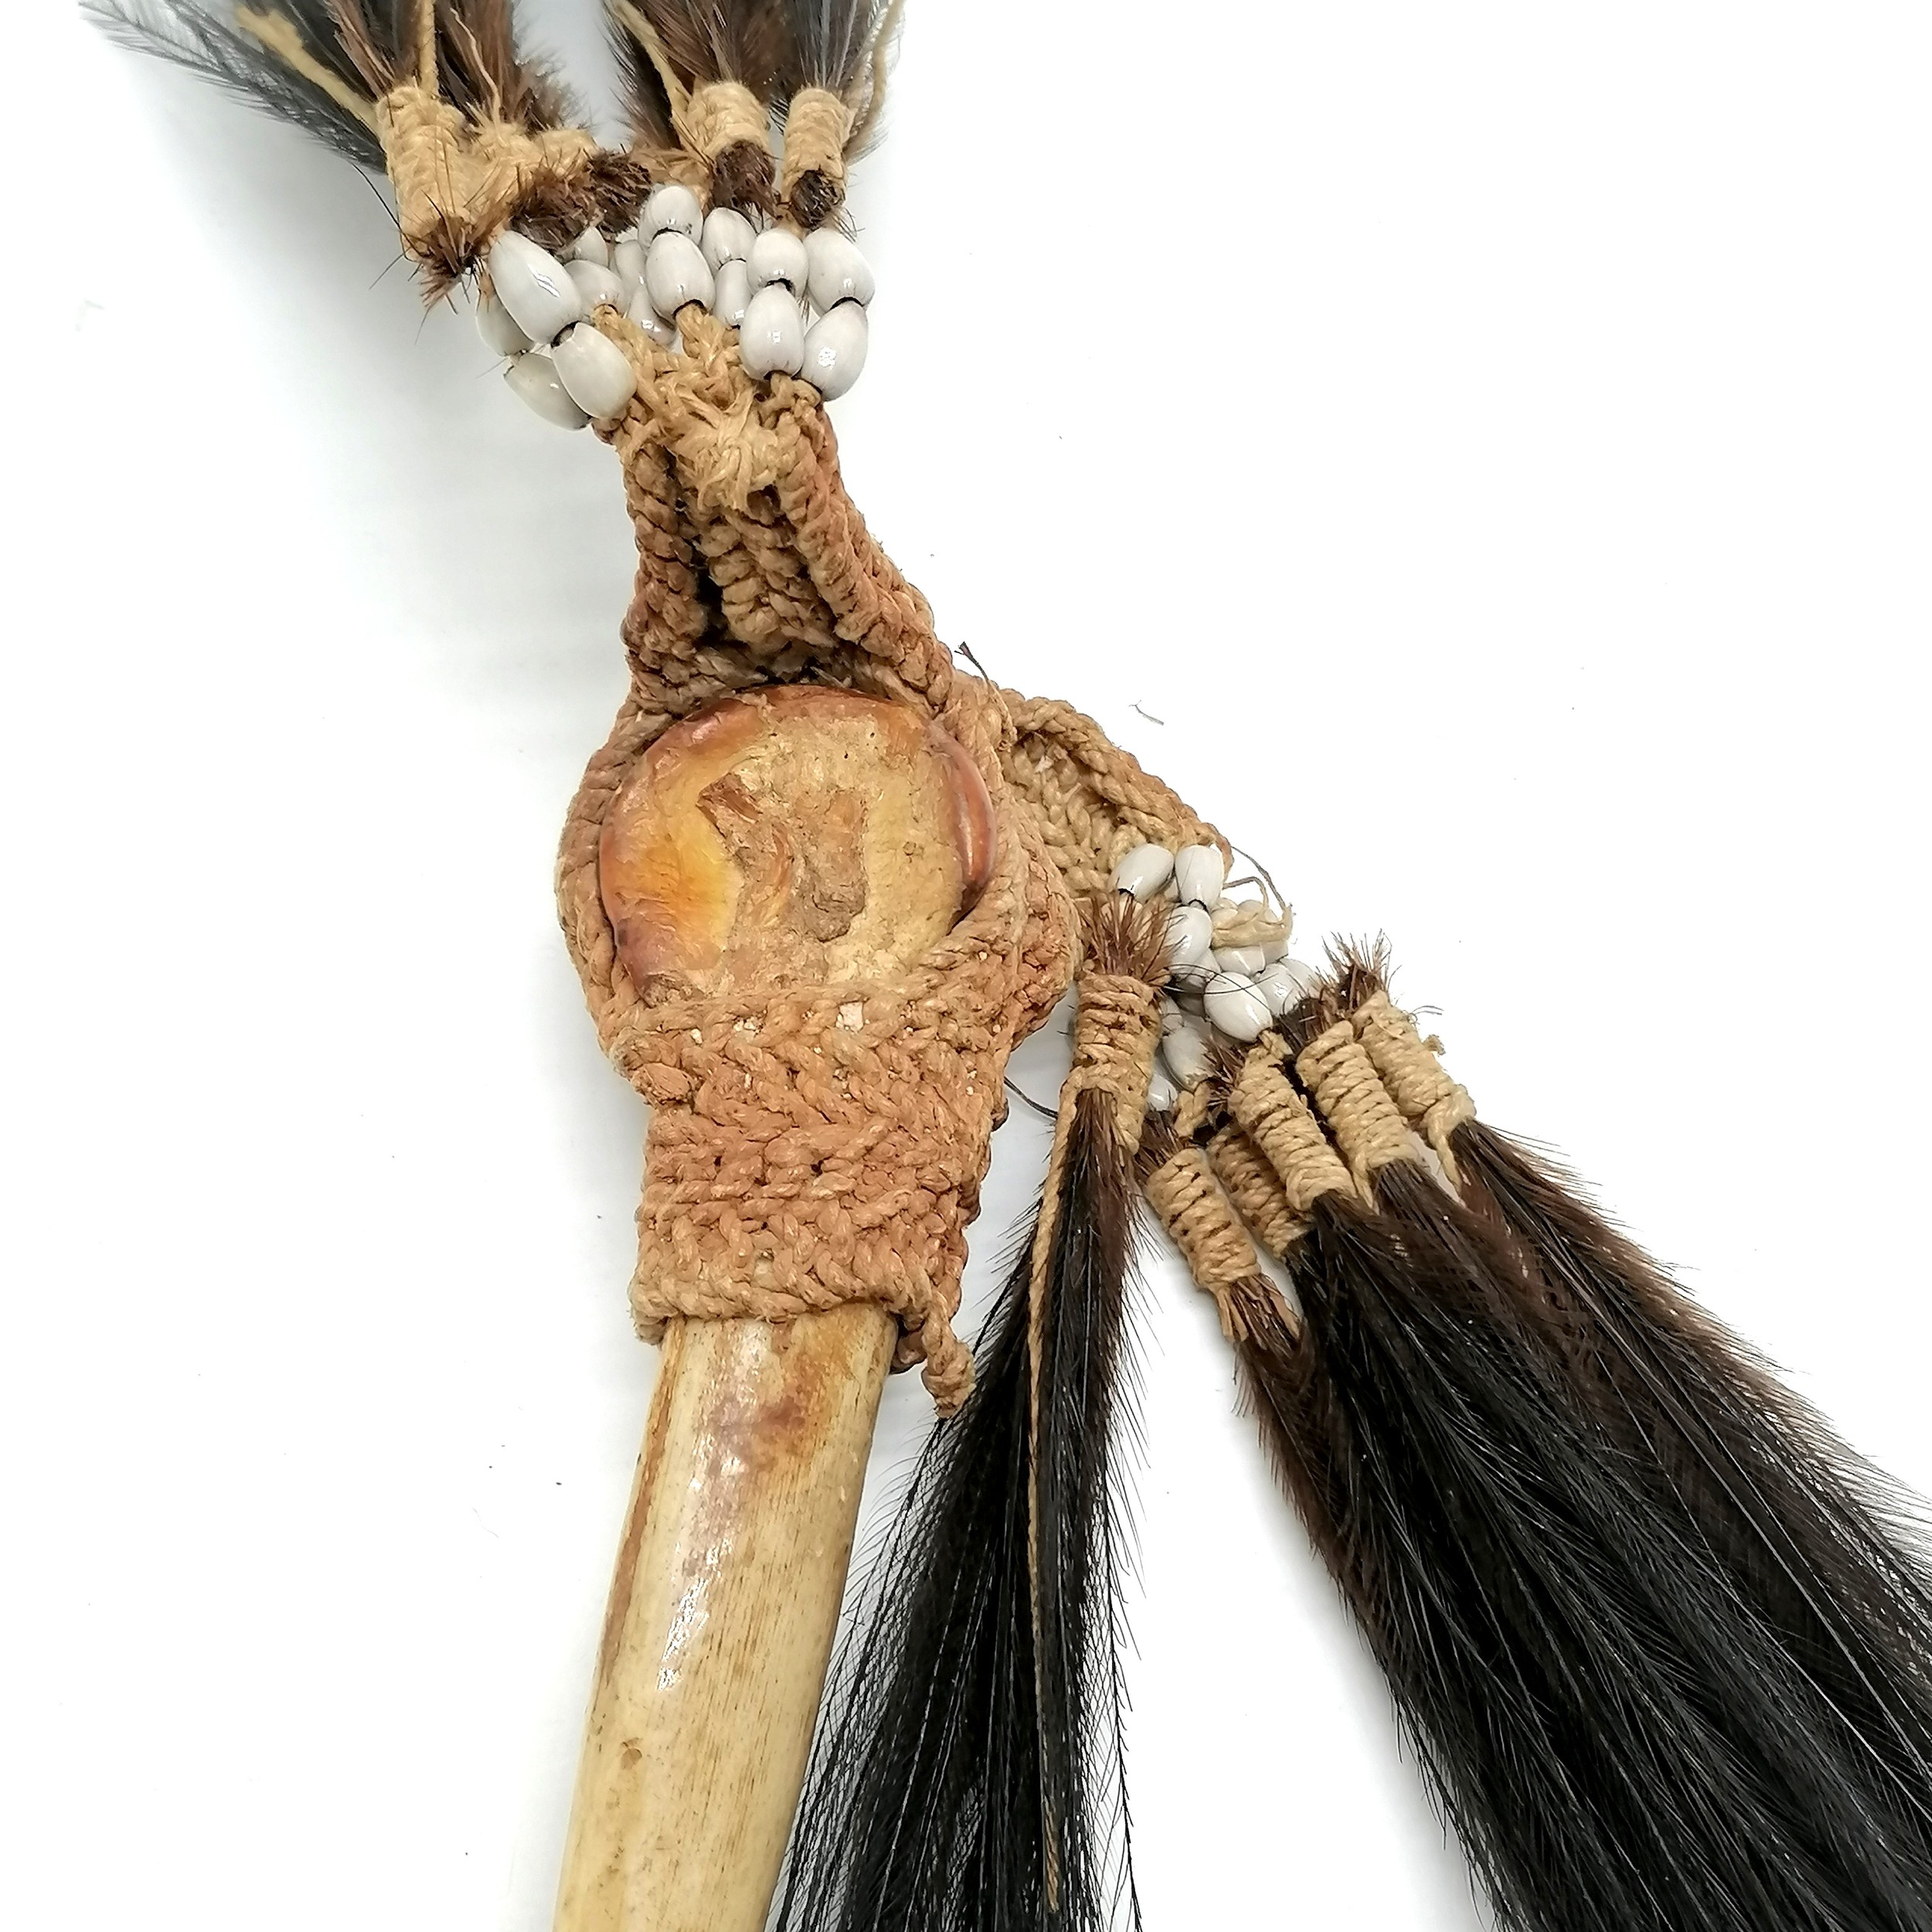 Antique New Guinea Cassowary bone ceremonial dagger with string, bead and feather detail 31cm long. - Image 3 of 3